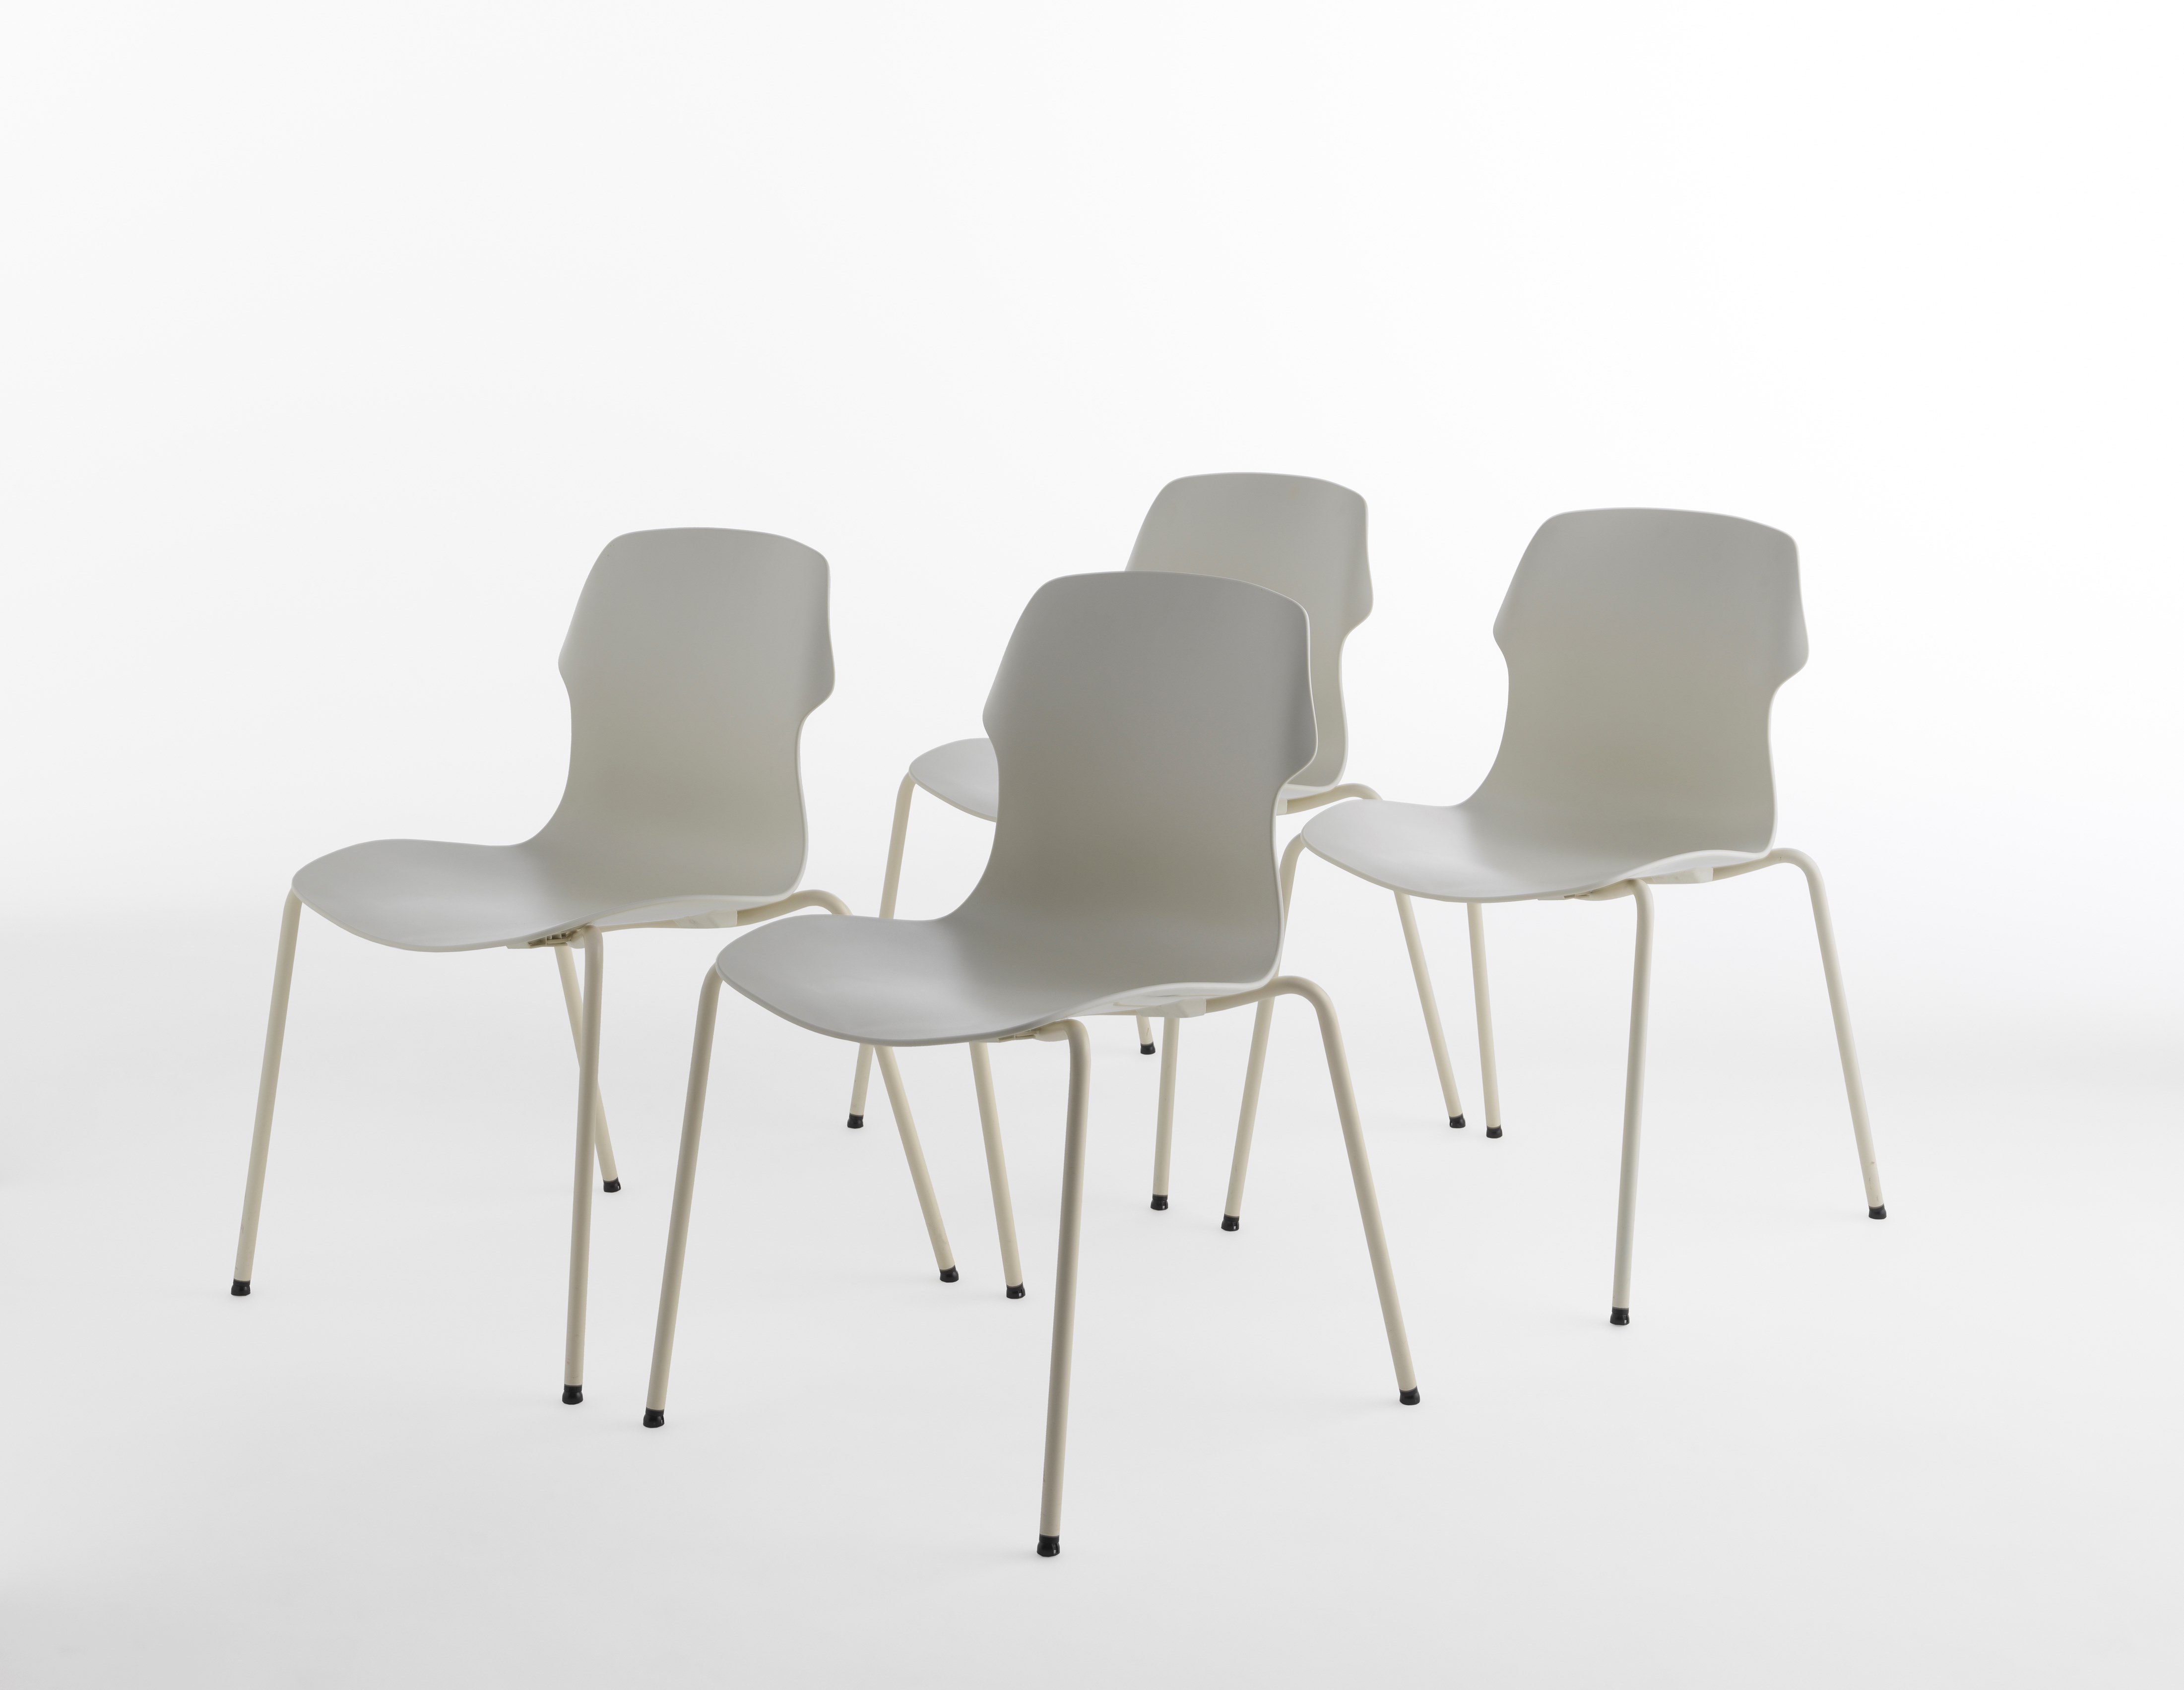 stereo-chair-casamania-horm-106736-rel483598f4